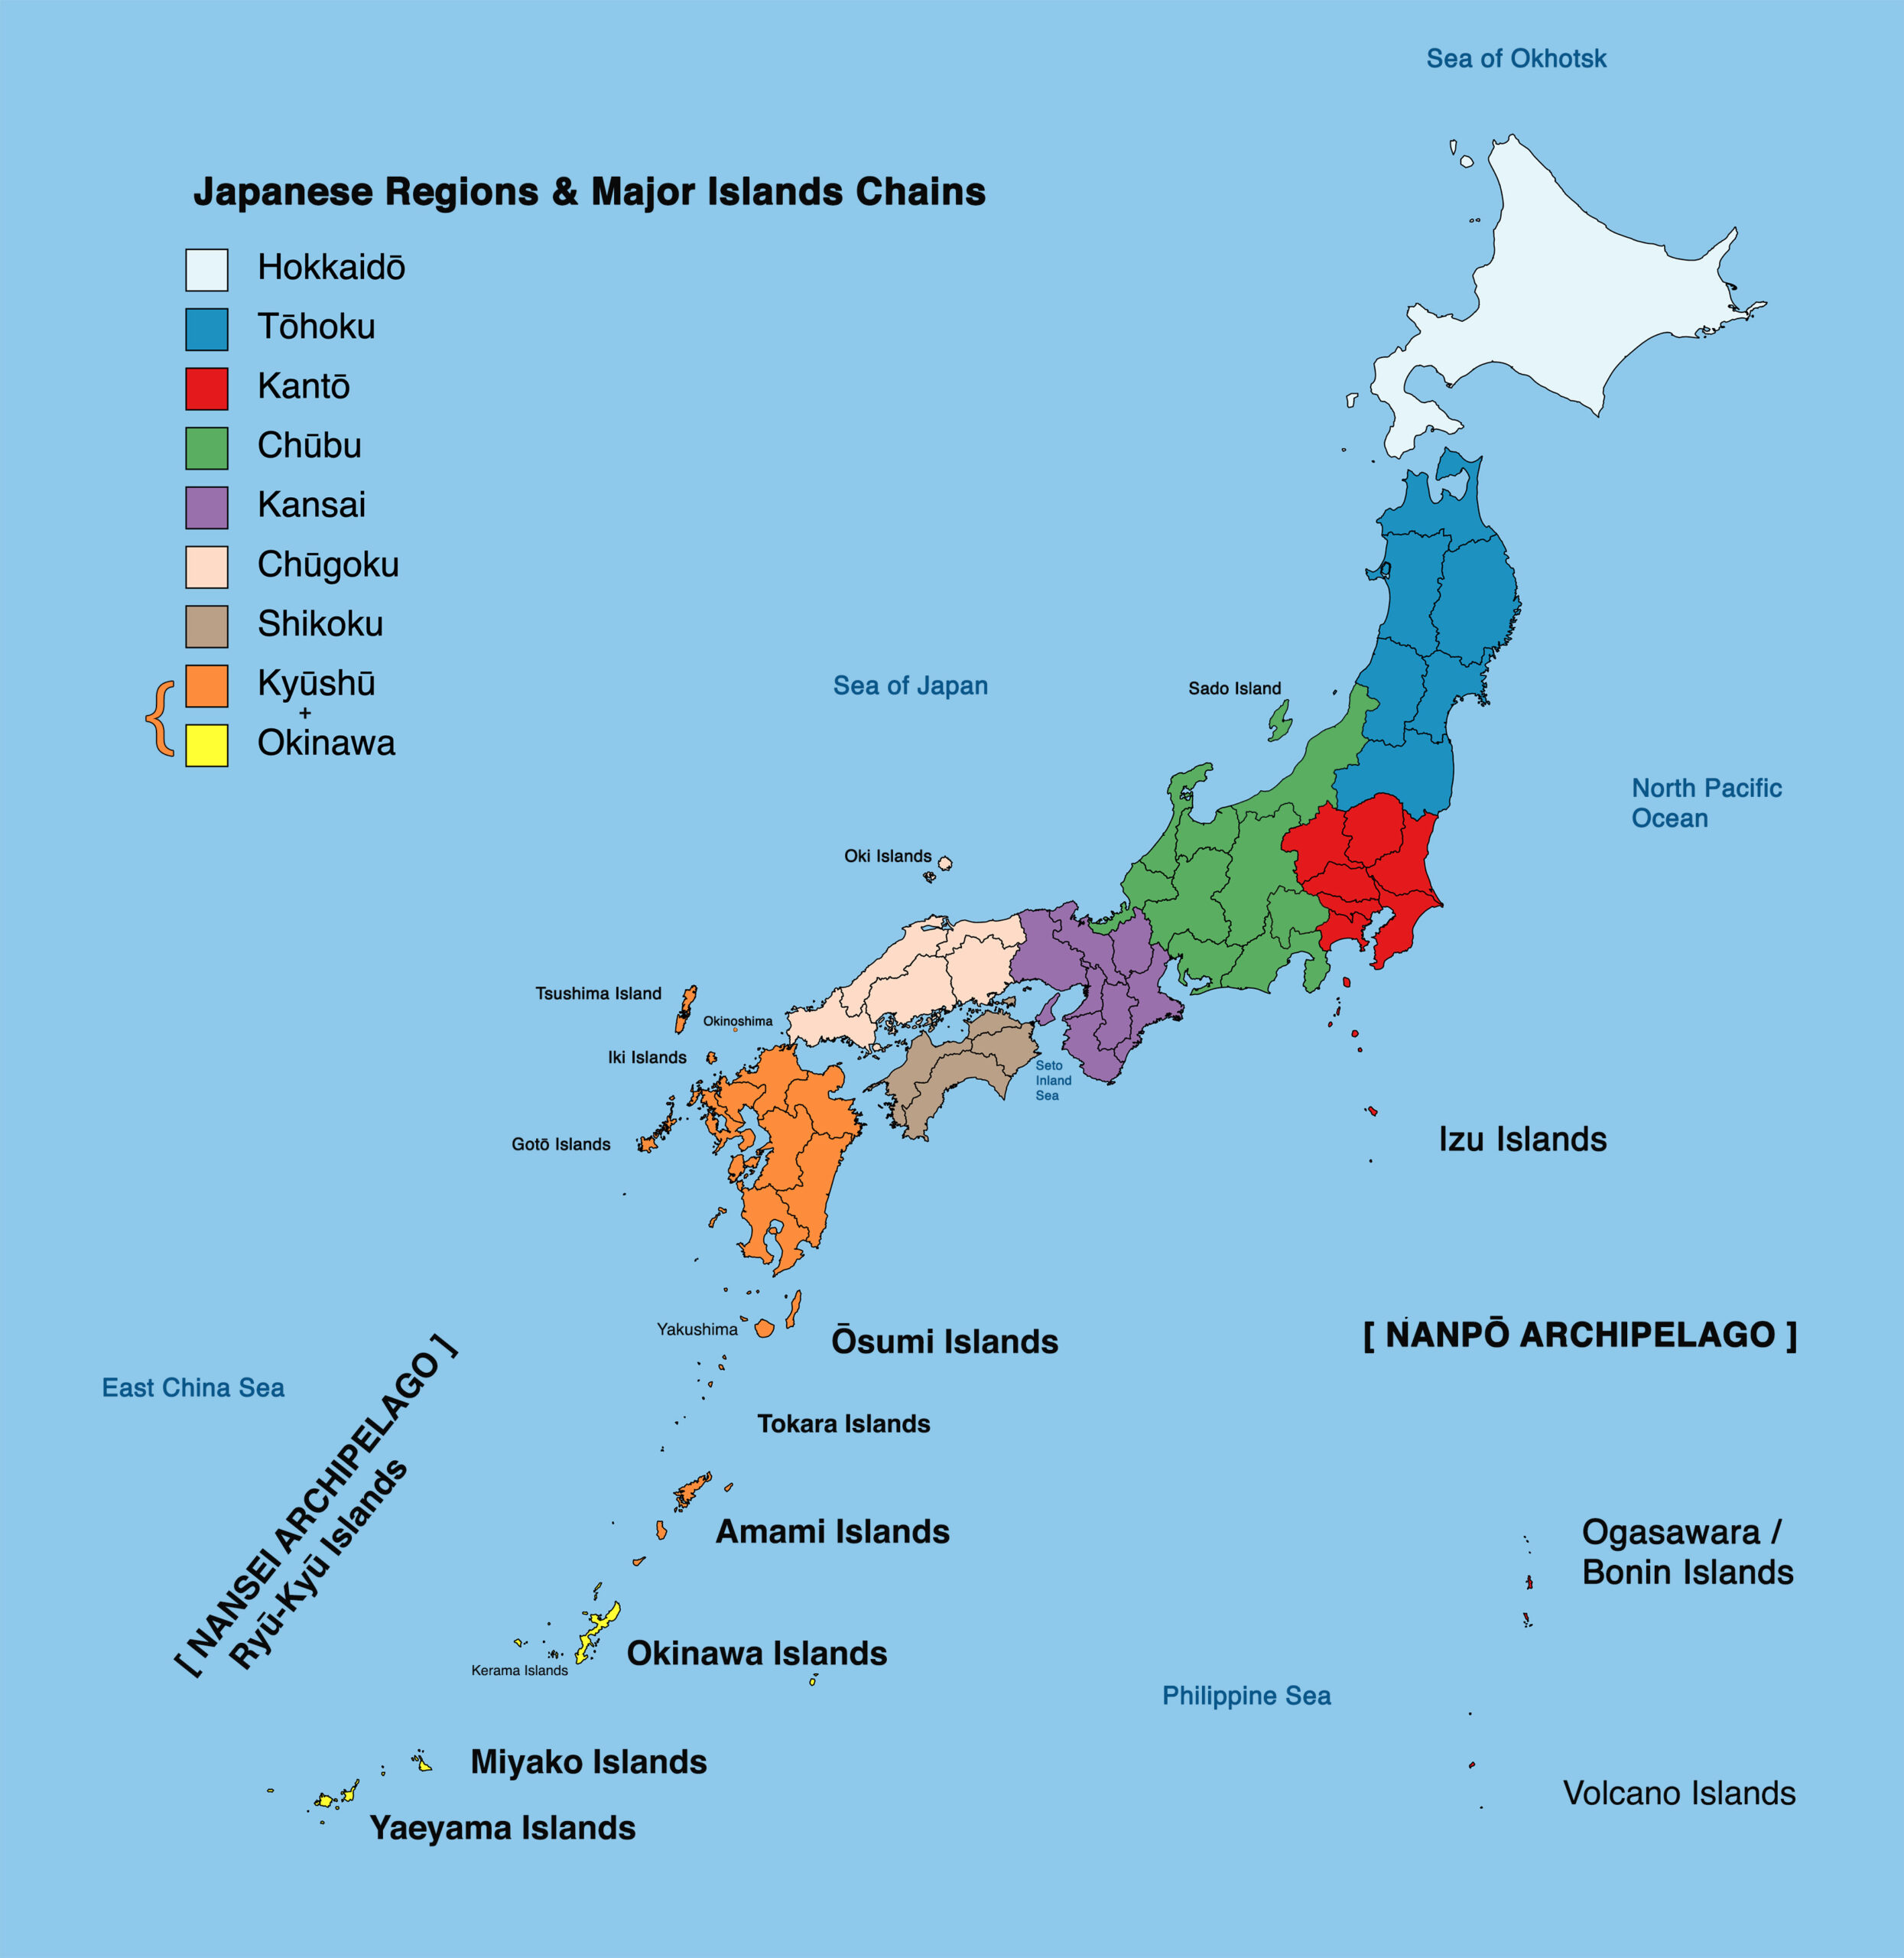 JAPANESE REGIONS AND MAJOR ISLAND CHAINS